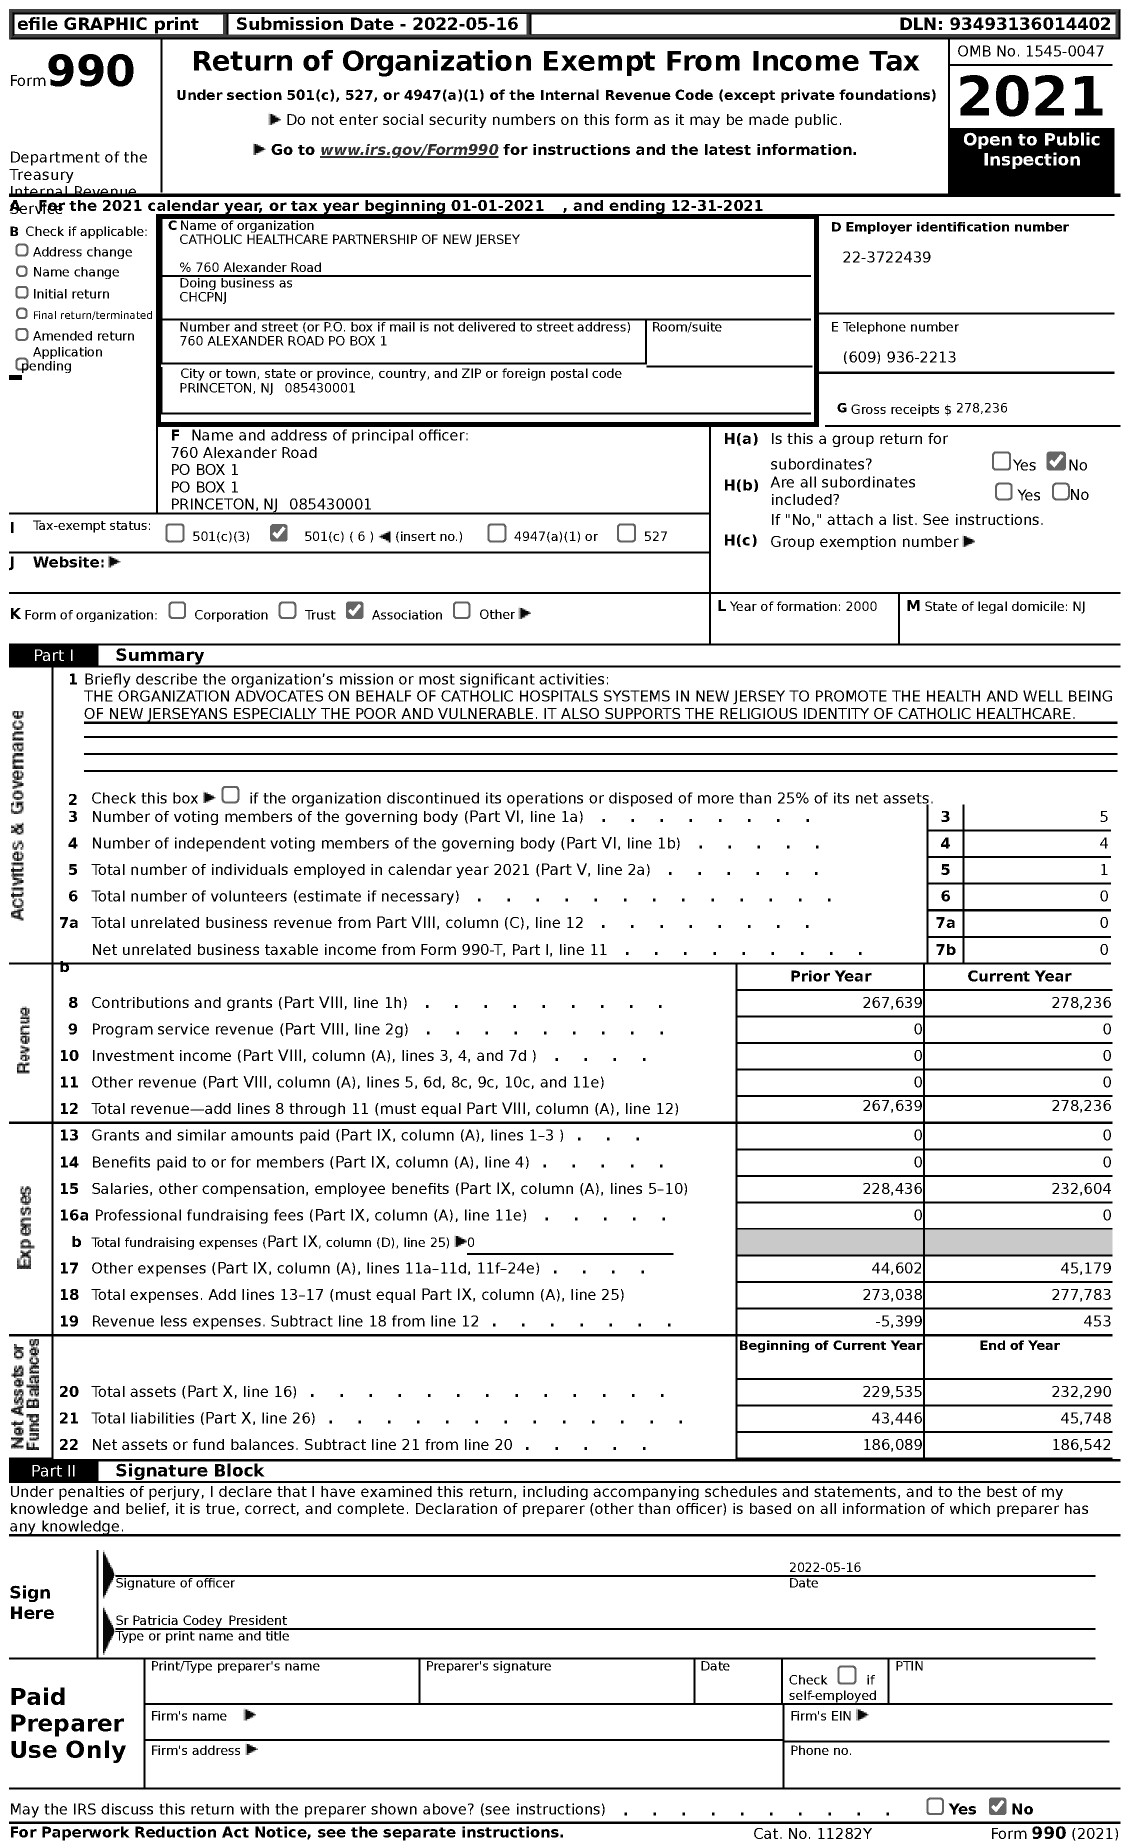 Image of first page of 2021 Form 990 for Catholic Healthcare Partnership of New Jersey (CHCPNJ)